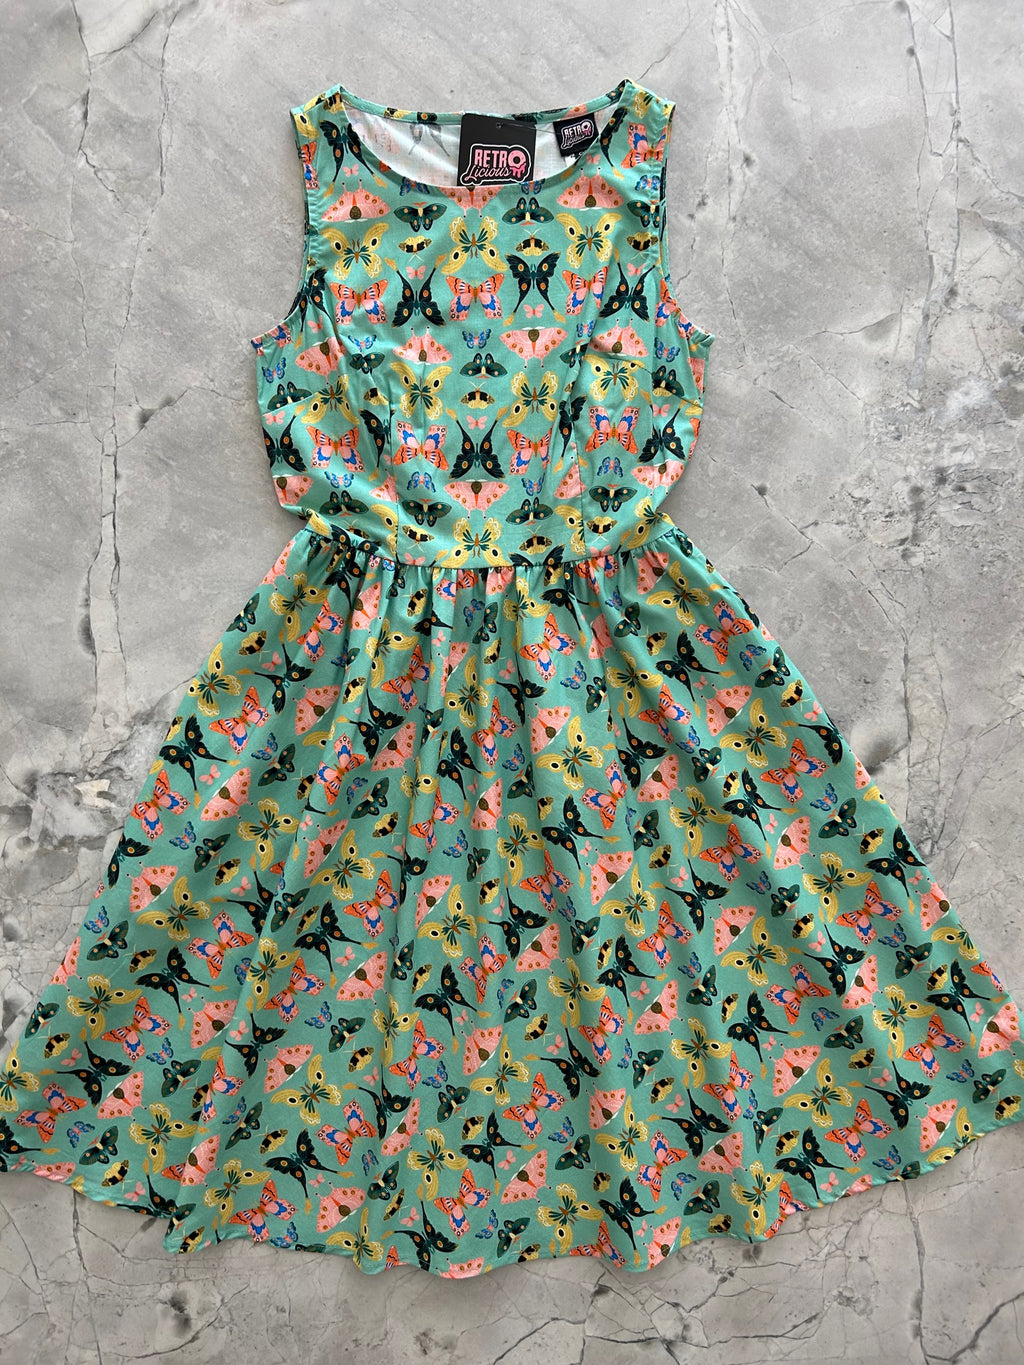 a photo of a dark mint green dress with colorful butterflies 